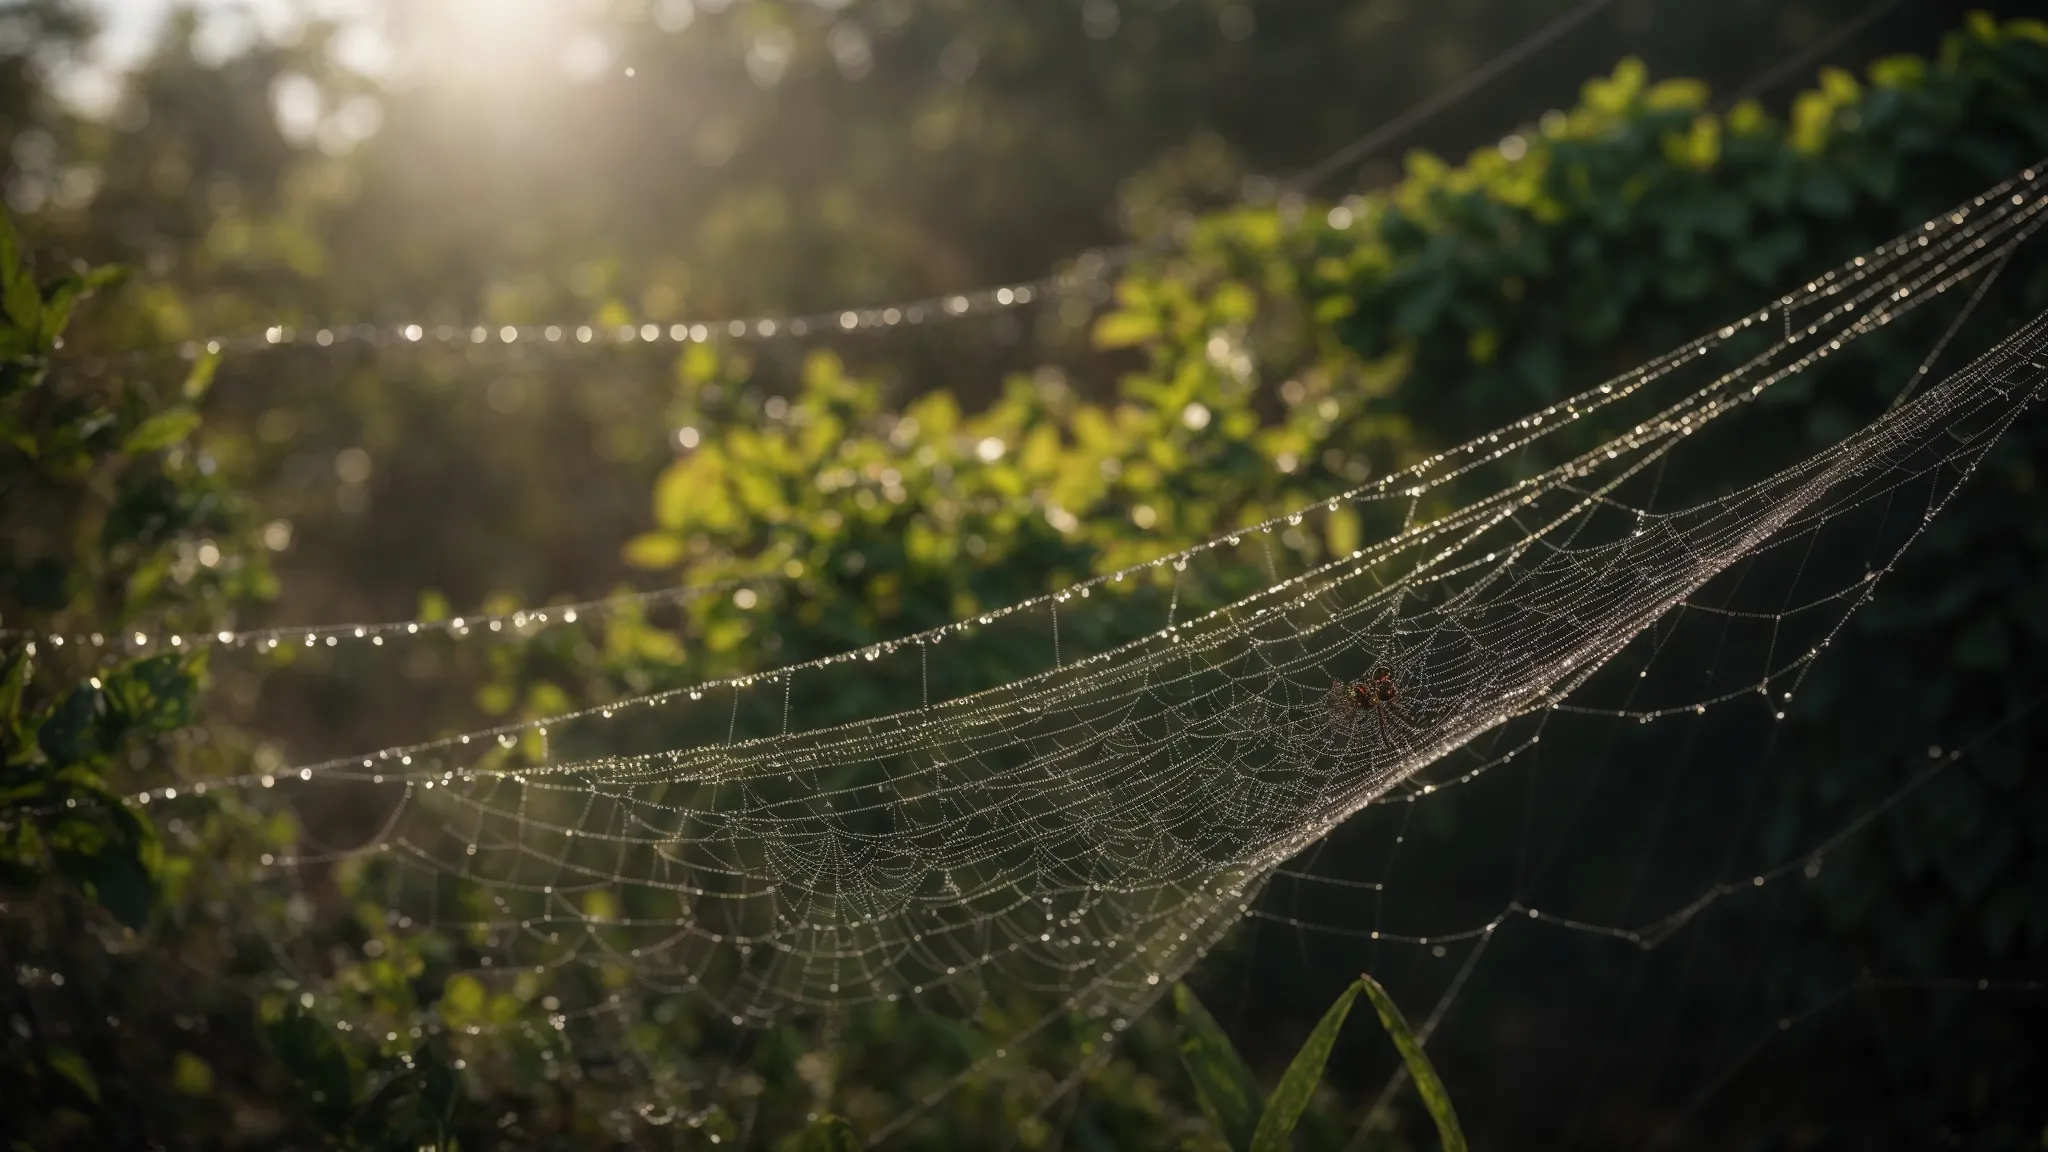 a spider deftly weaves an intricate web connecting multiple anchor points within a dew-kissed morning garden.